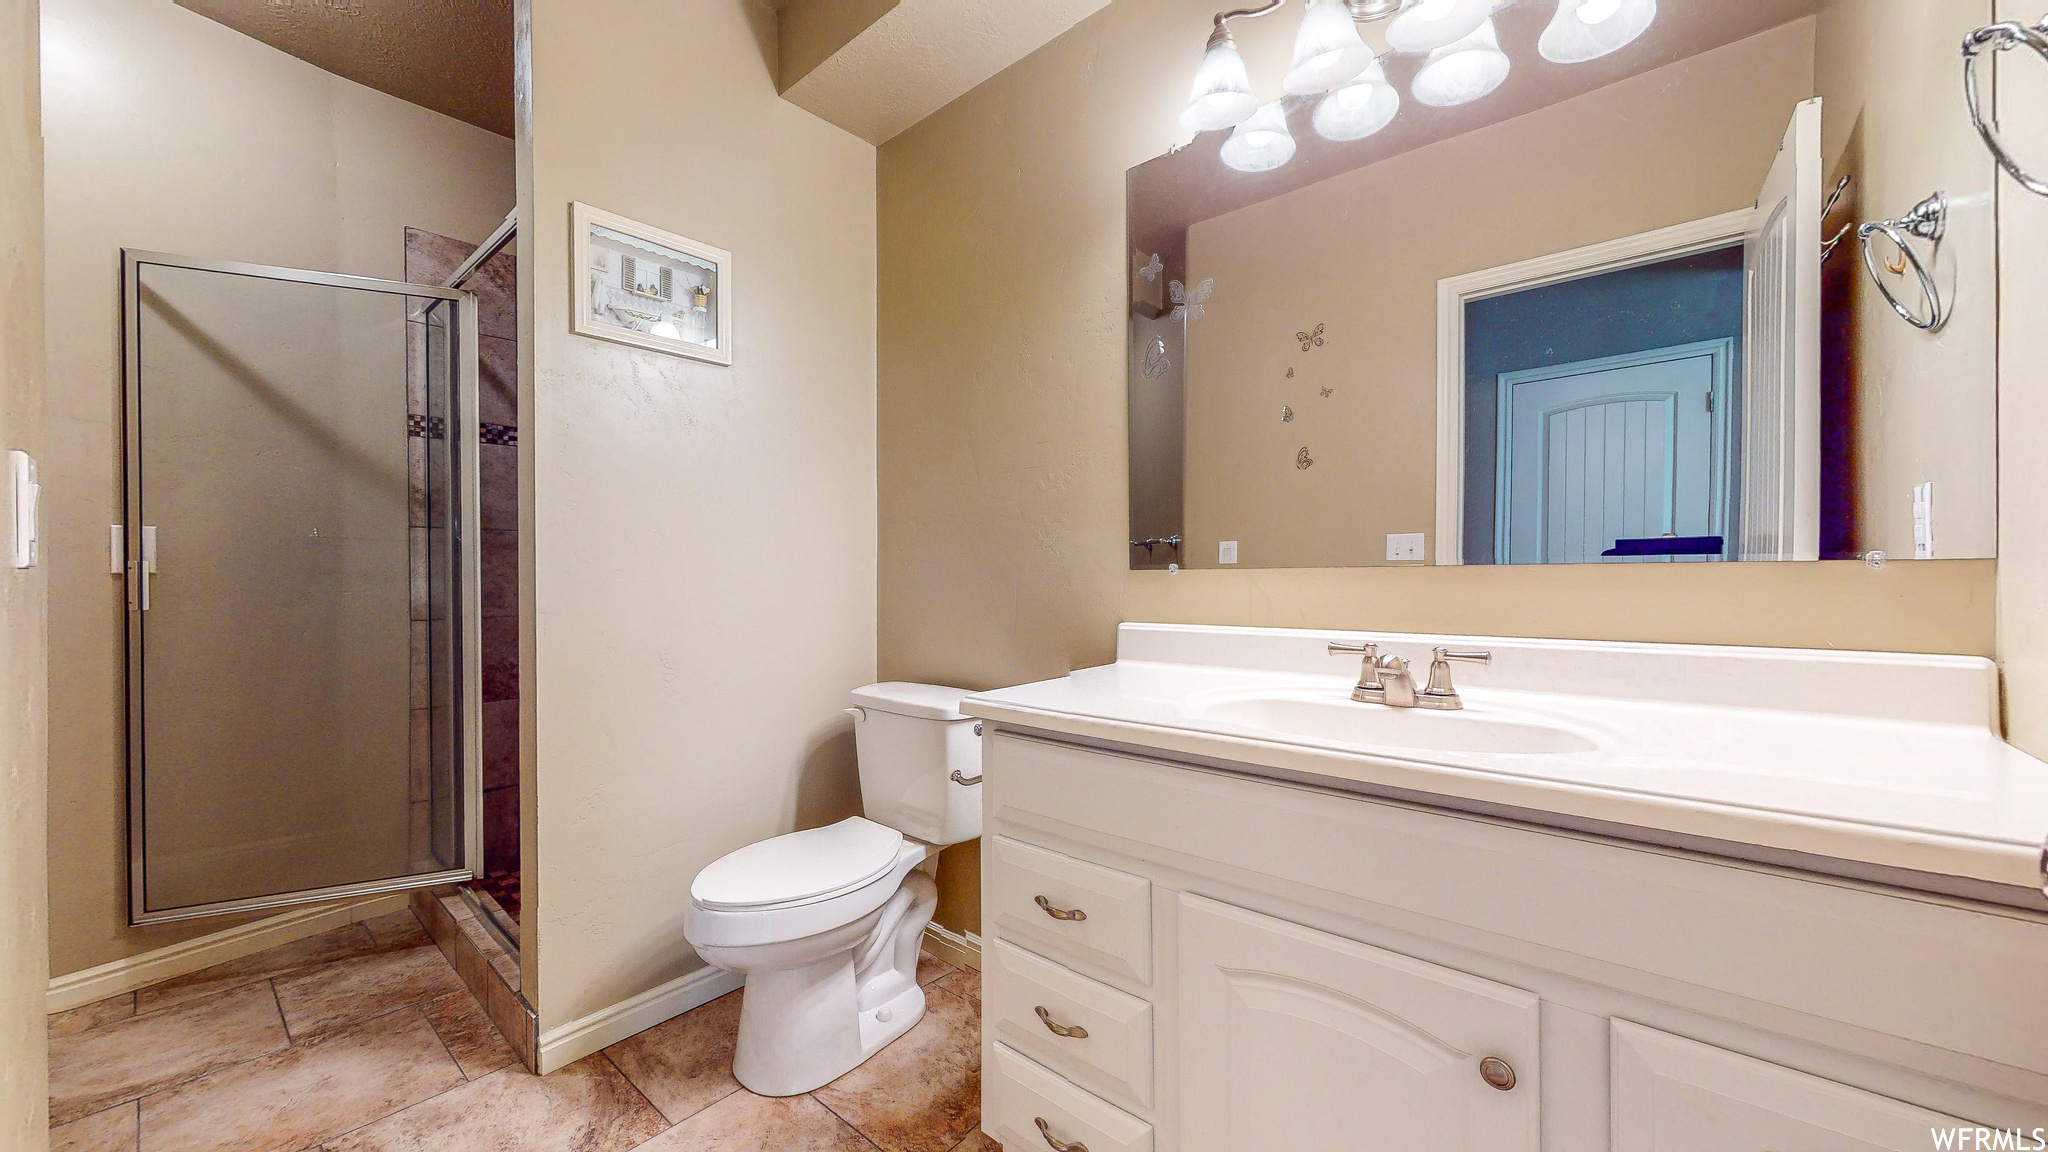 Basement bathroom featuring tile flooring, an enclosed shower, toilet, and vanity with extensive cabinet space